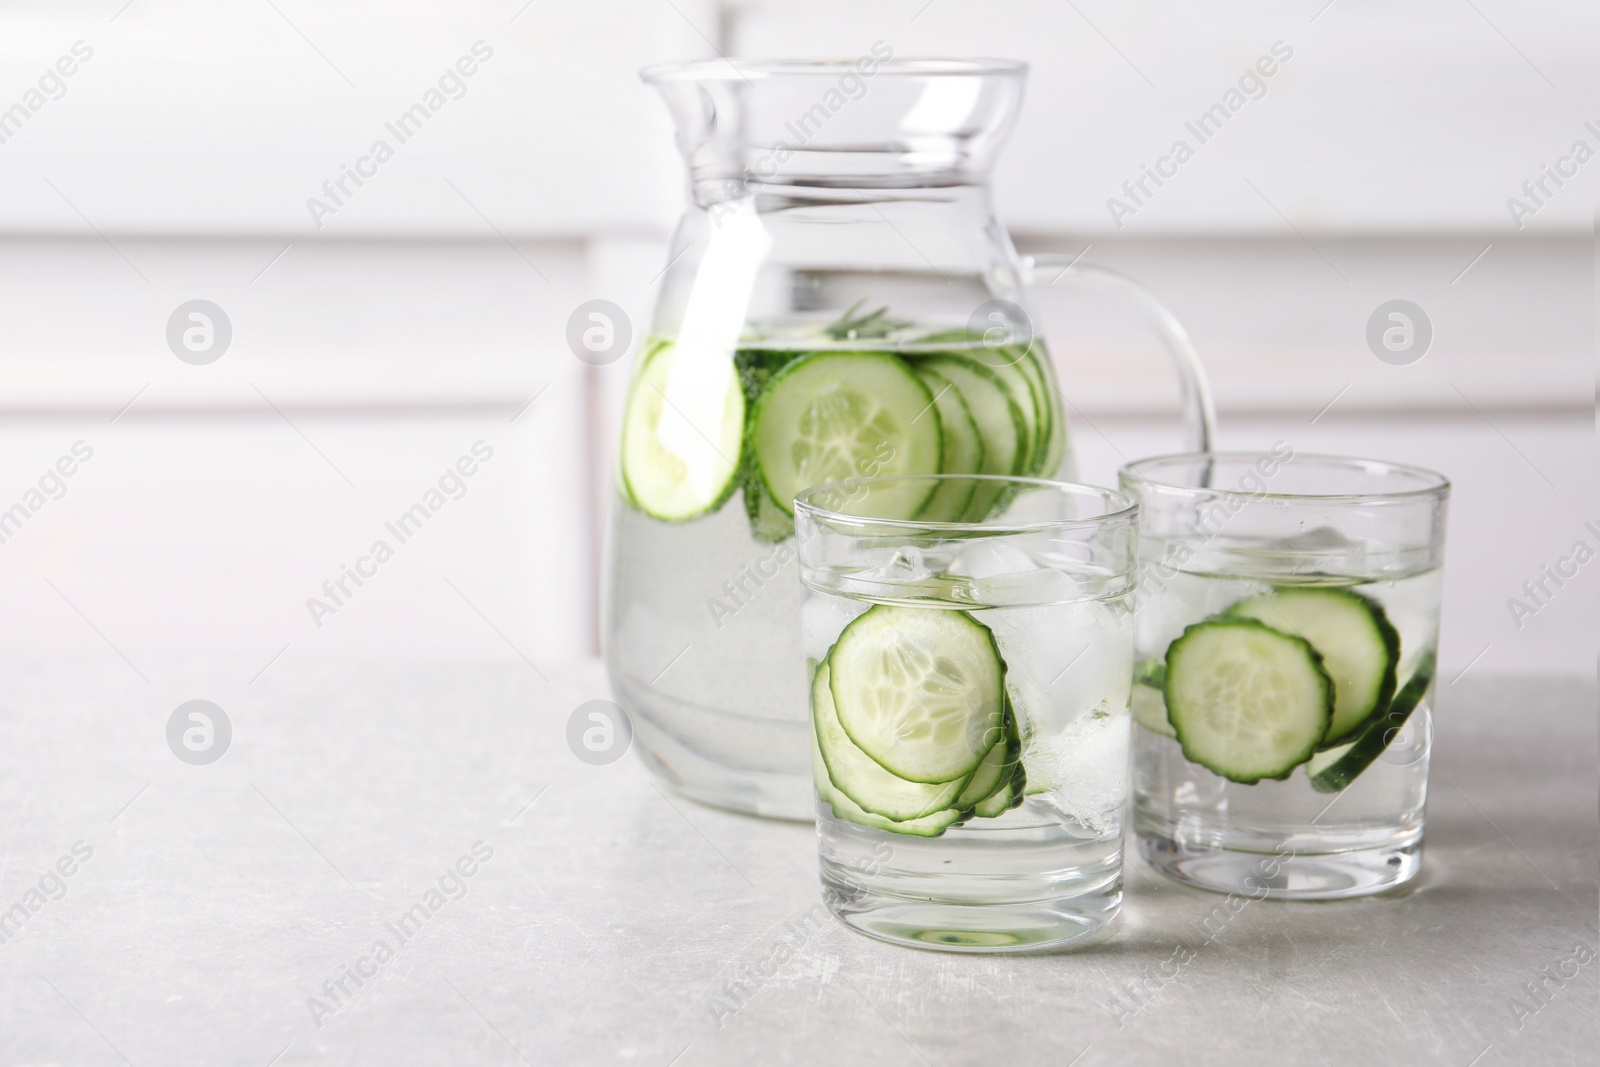 Photo of Glasses and jug of fresh cucumber water on table. Space for text